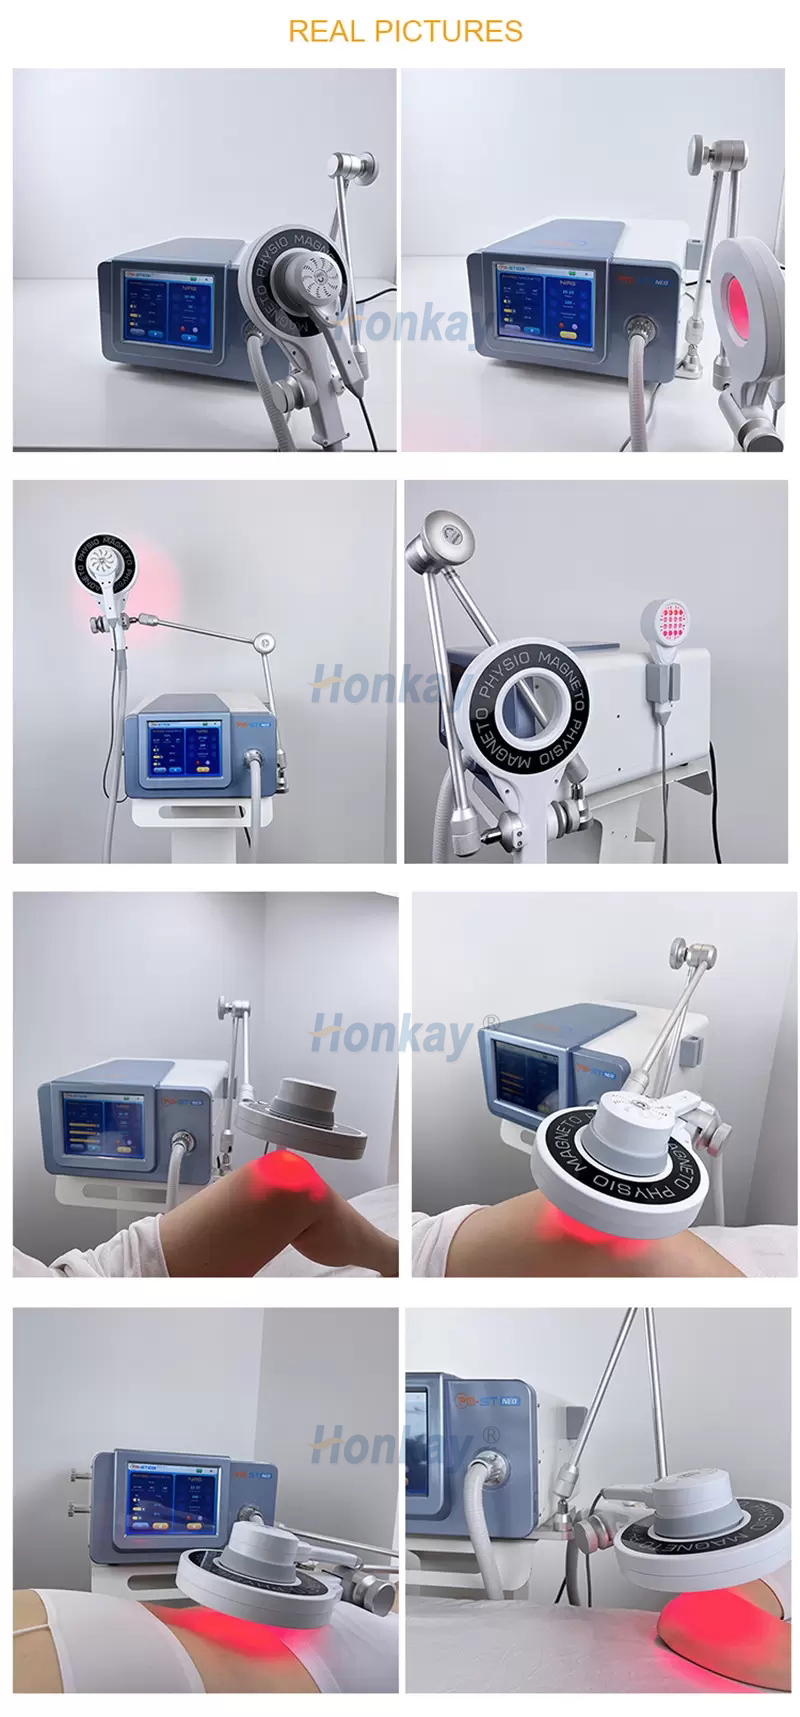 2 in 1 health gadgets physiotherapy magneto extracorporeal transduction emtt therapy physiotherapy instruments EMTT Therapy Physiotherapy Equipment | Honkay physiotherapy equipment,physiotherapy machine price,physiotherapy instruments